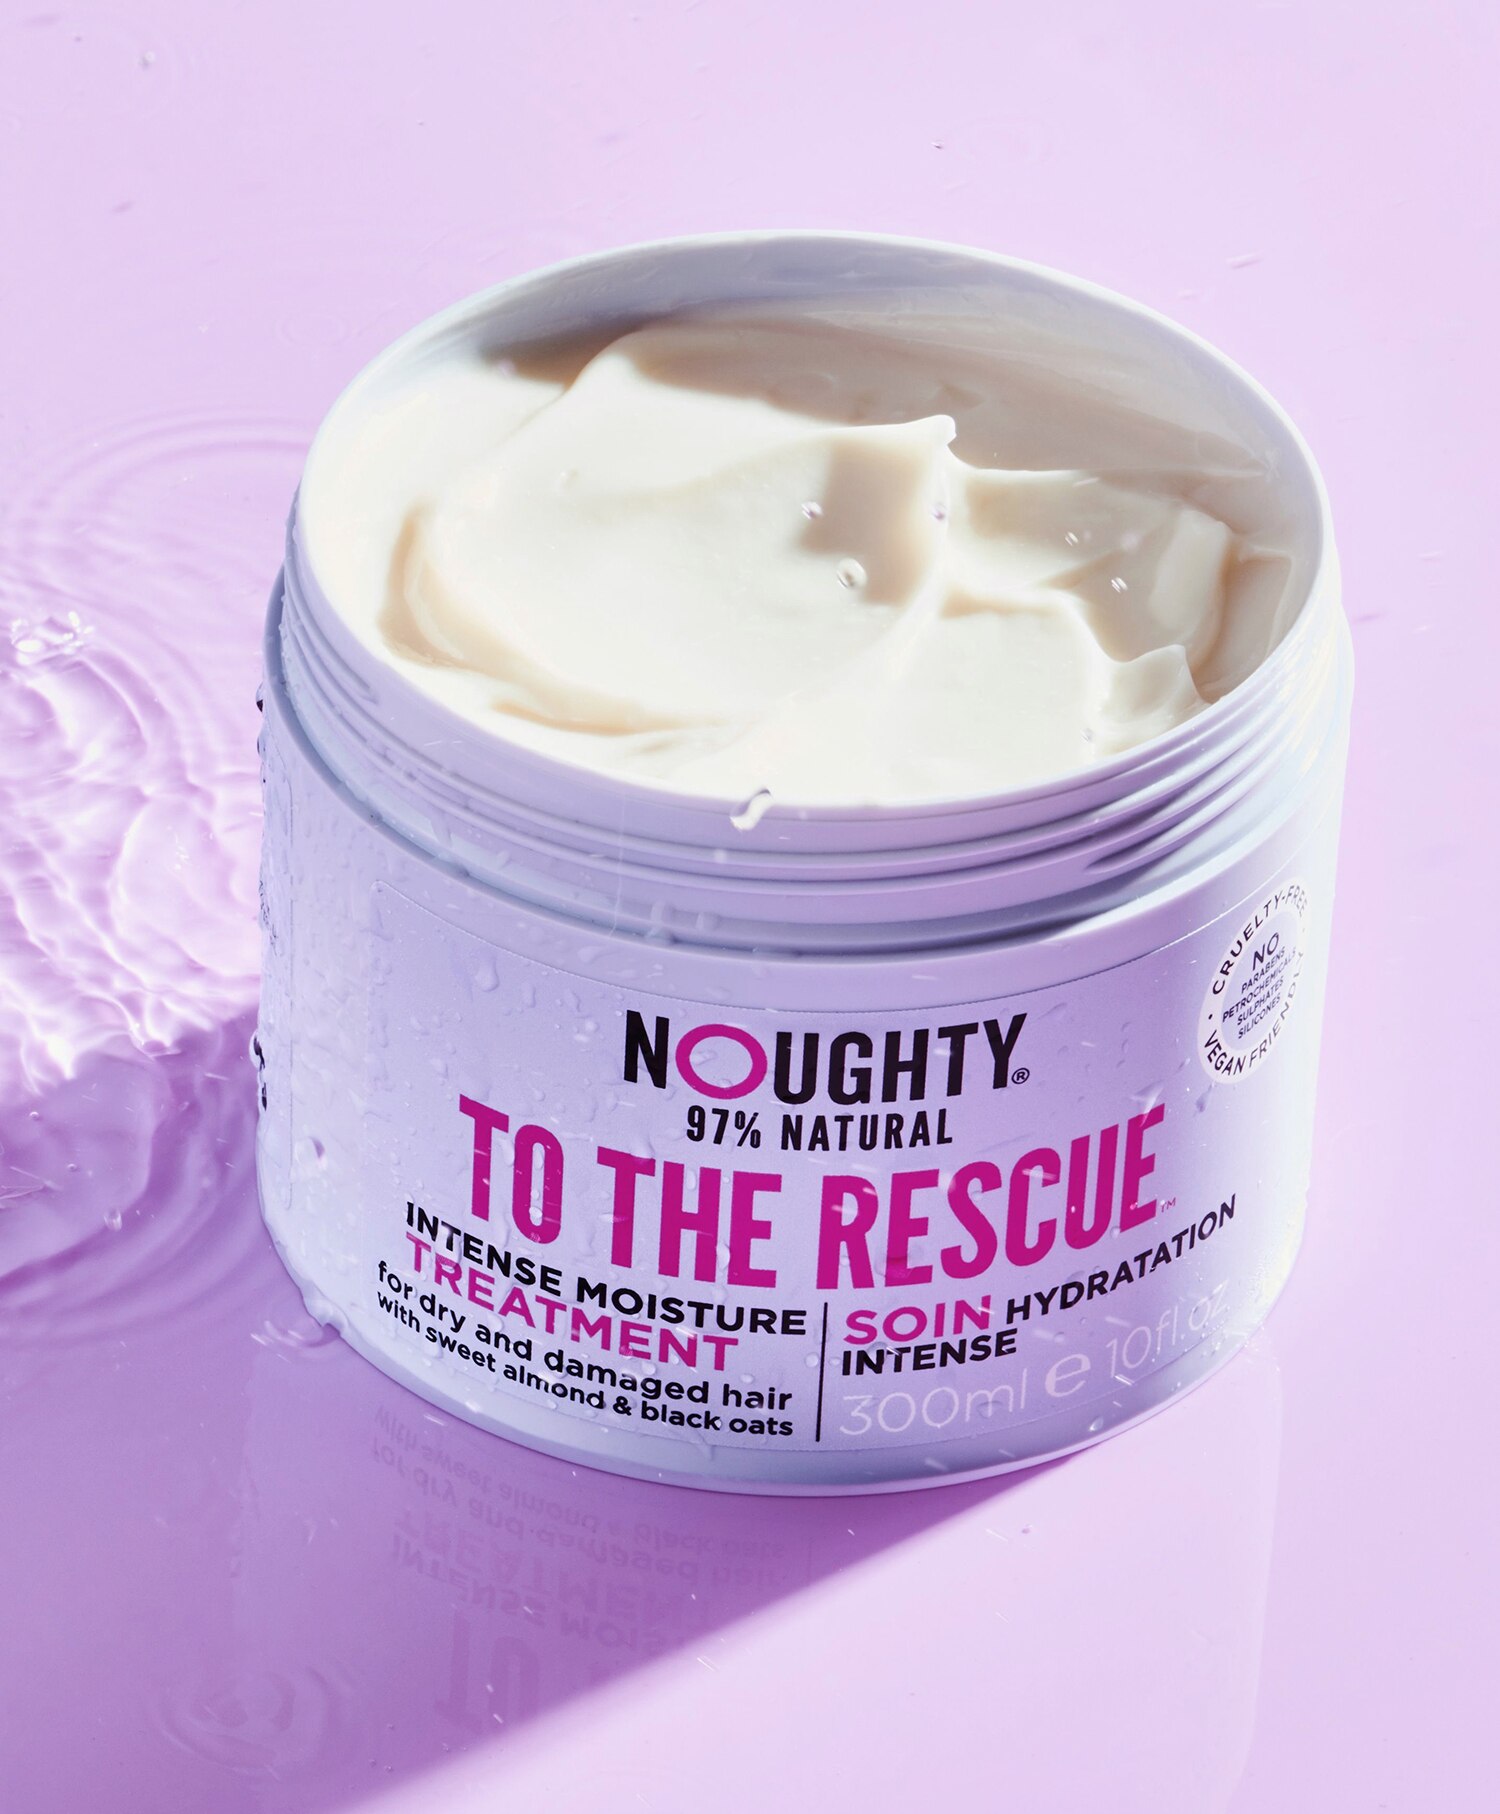 Noughty To The Rescue Intens Moisture Treatment